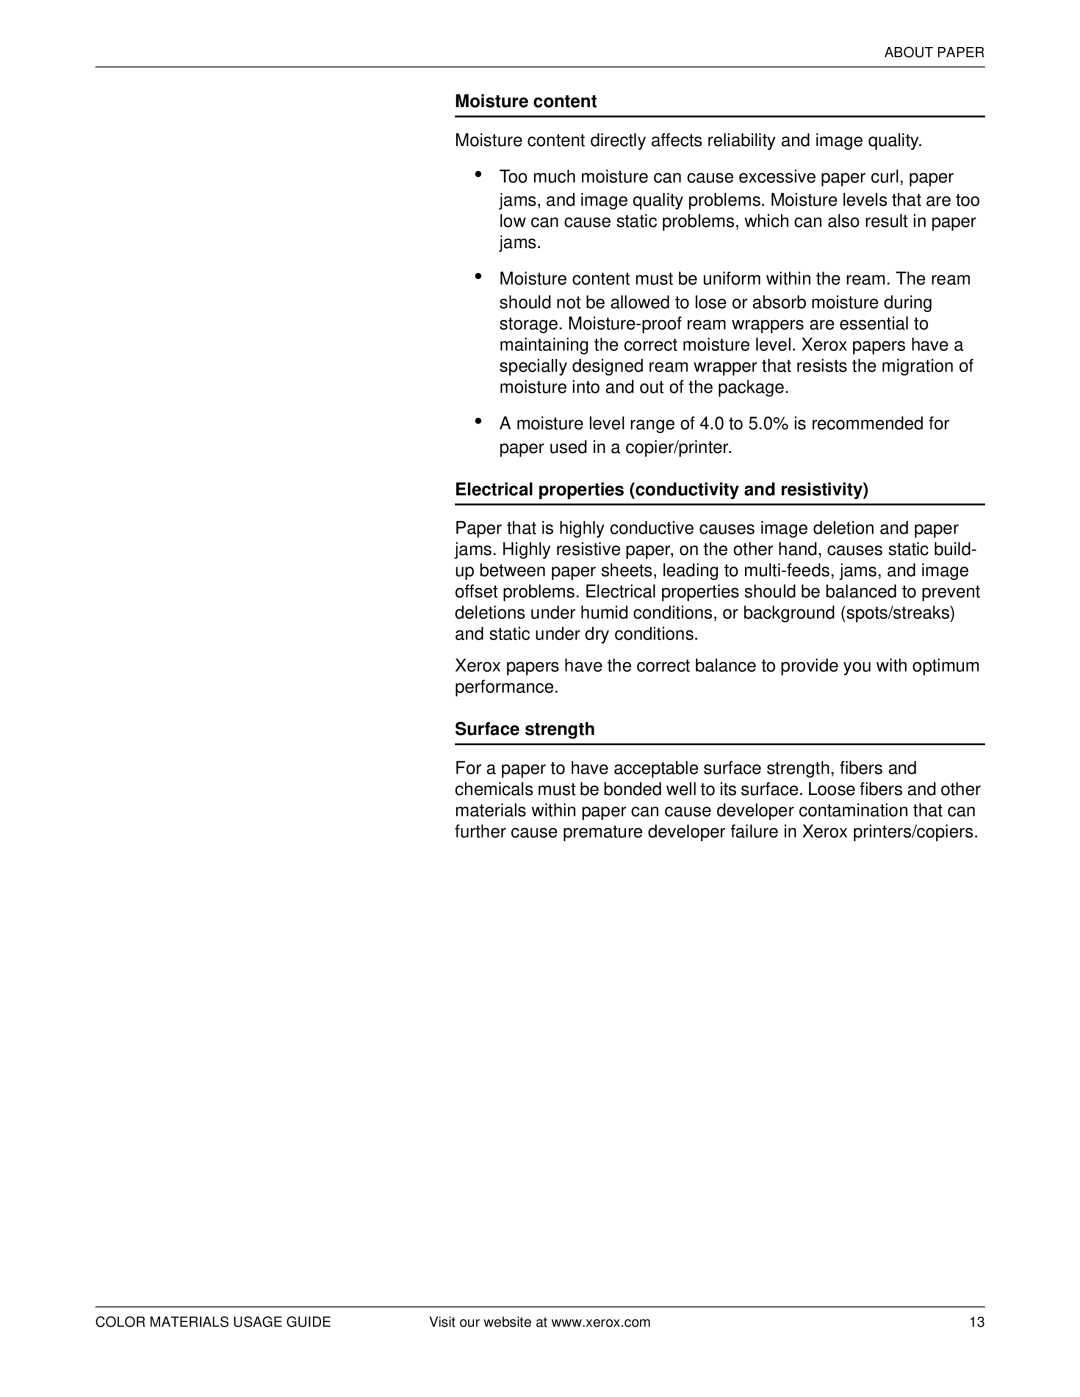 Xerox 12 manual Moisture content, Surface strength, About Paper, Color Materials Usage Guide 